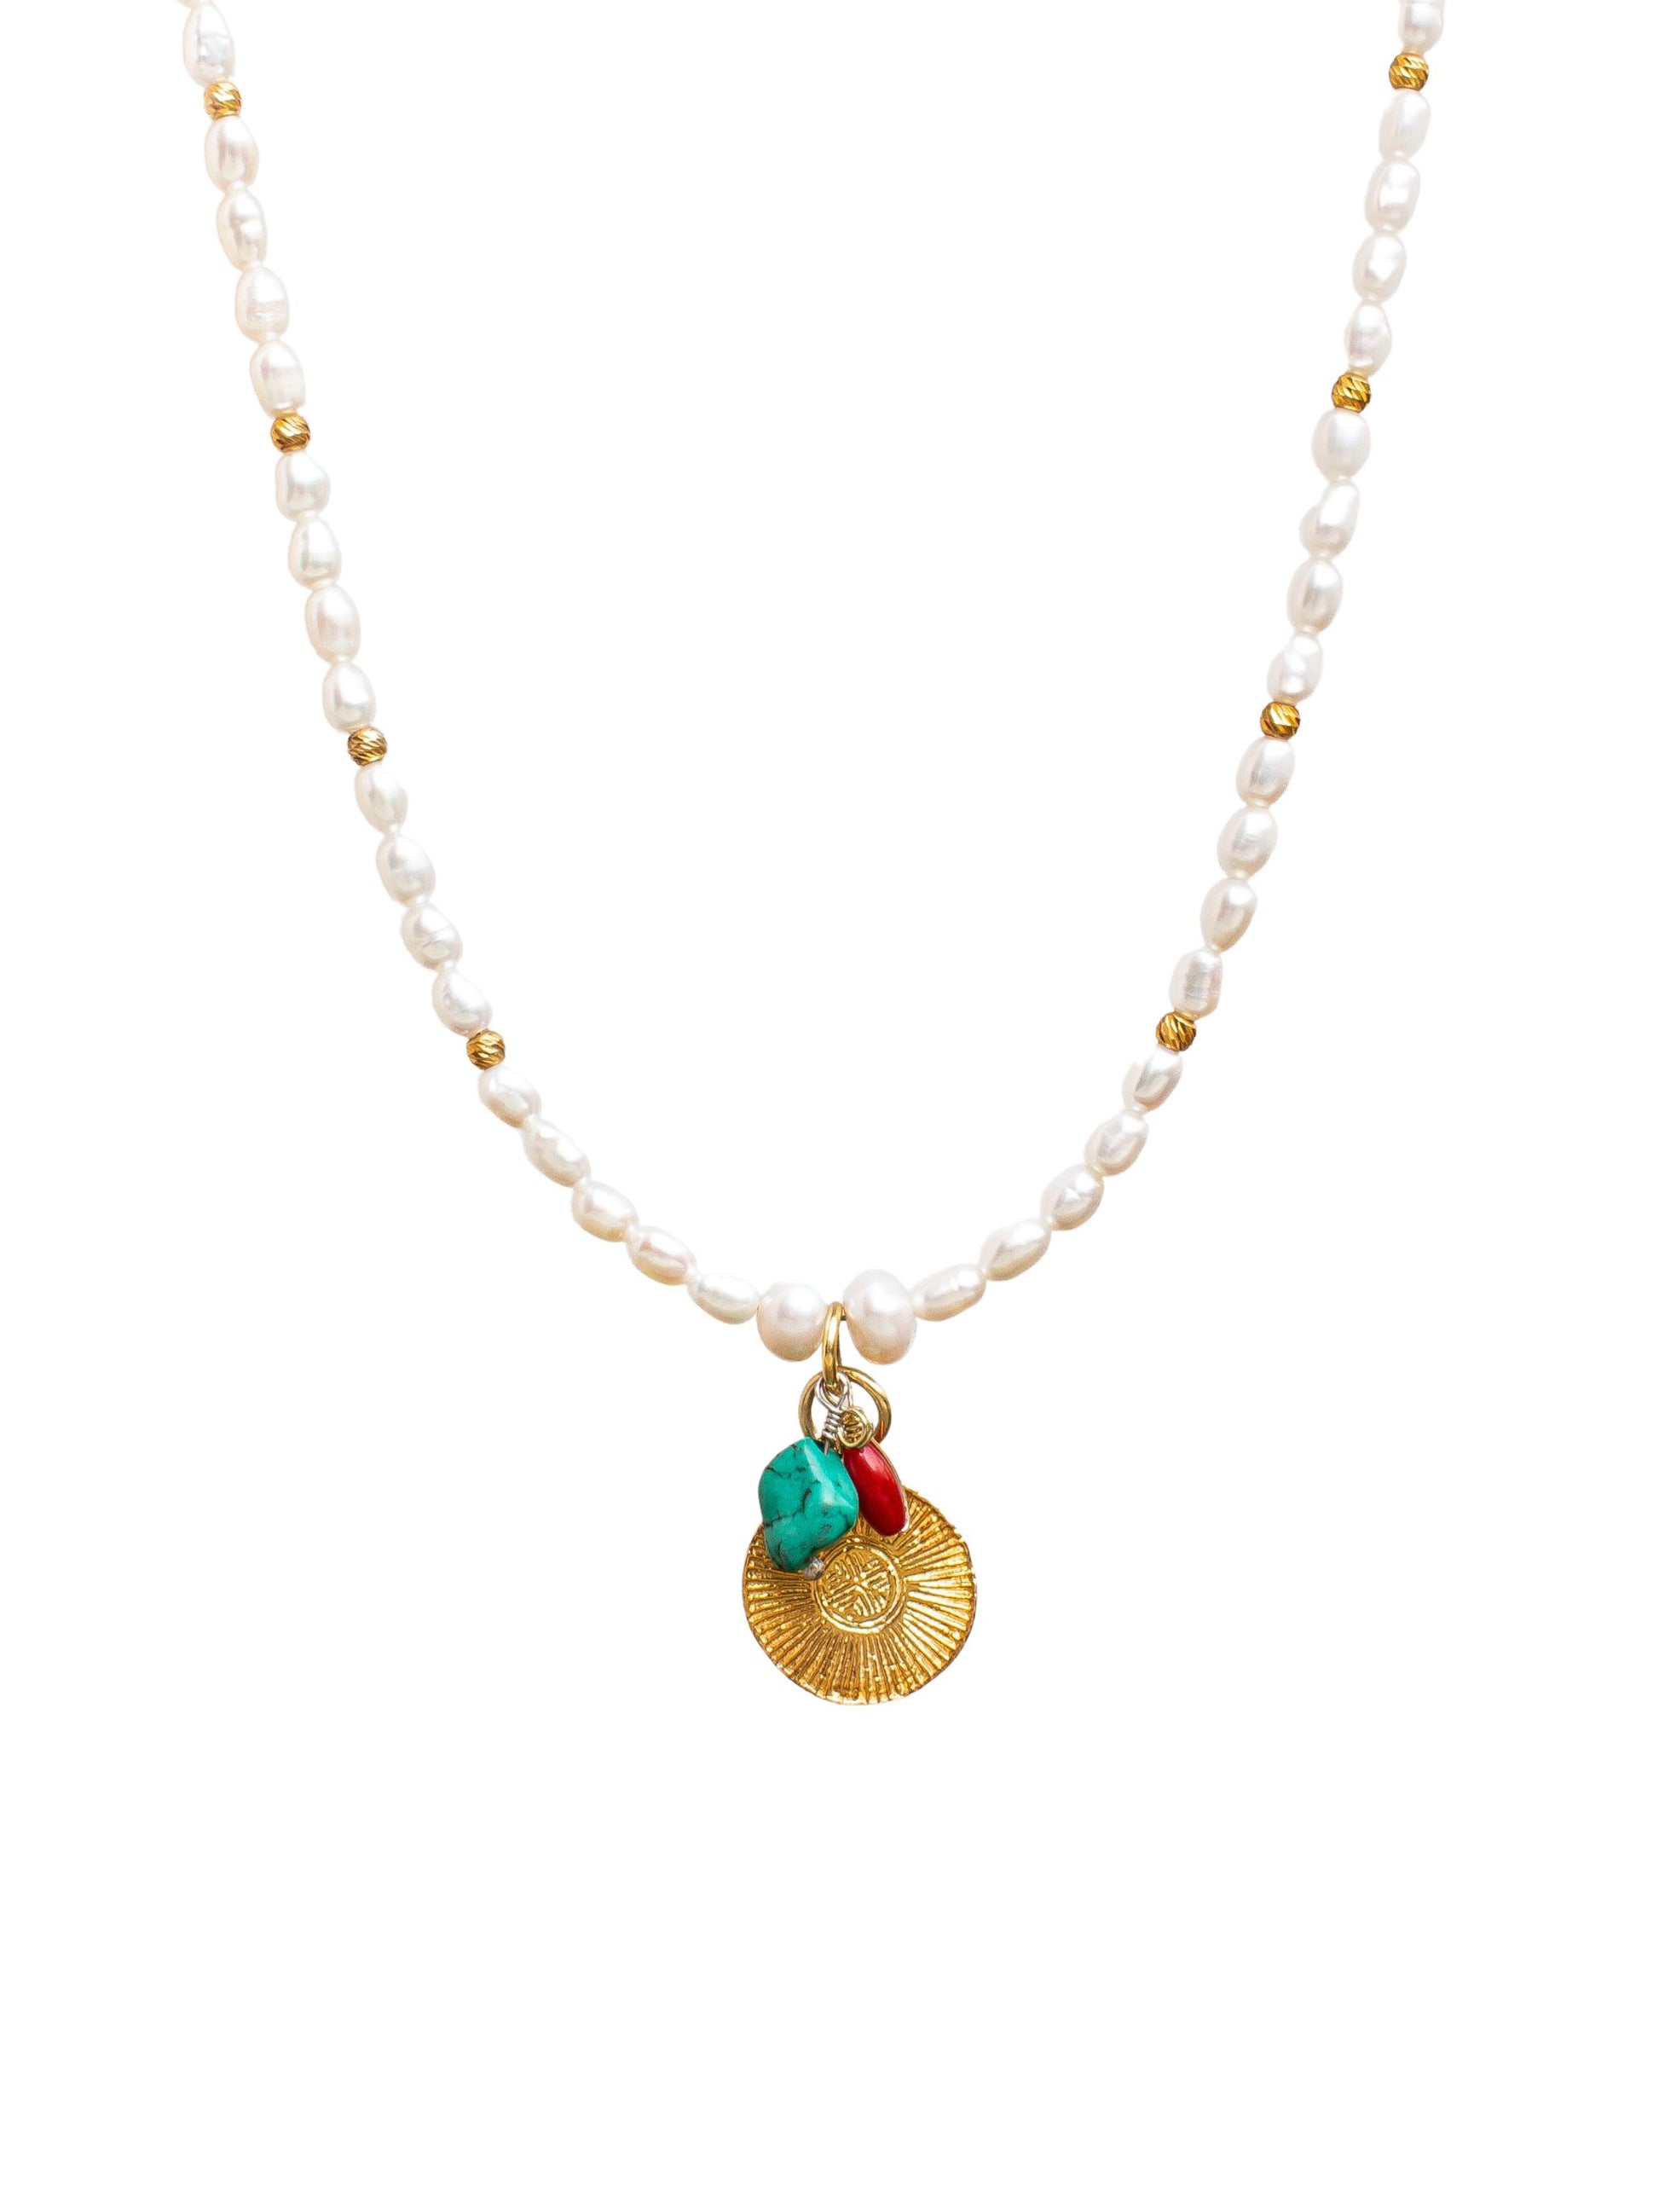 Pearl necklace with a coral and turquoise gemstone, sun shaped gold pendant